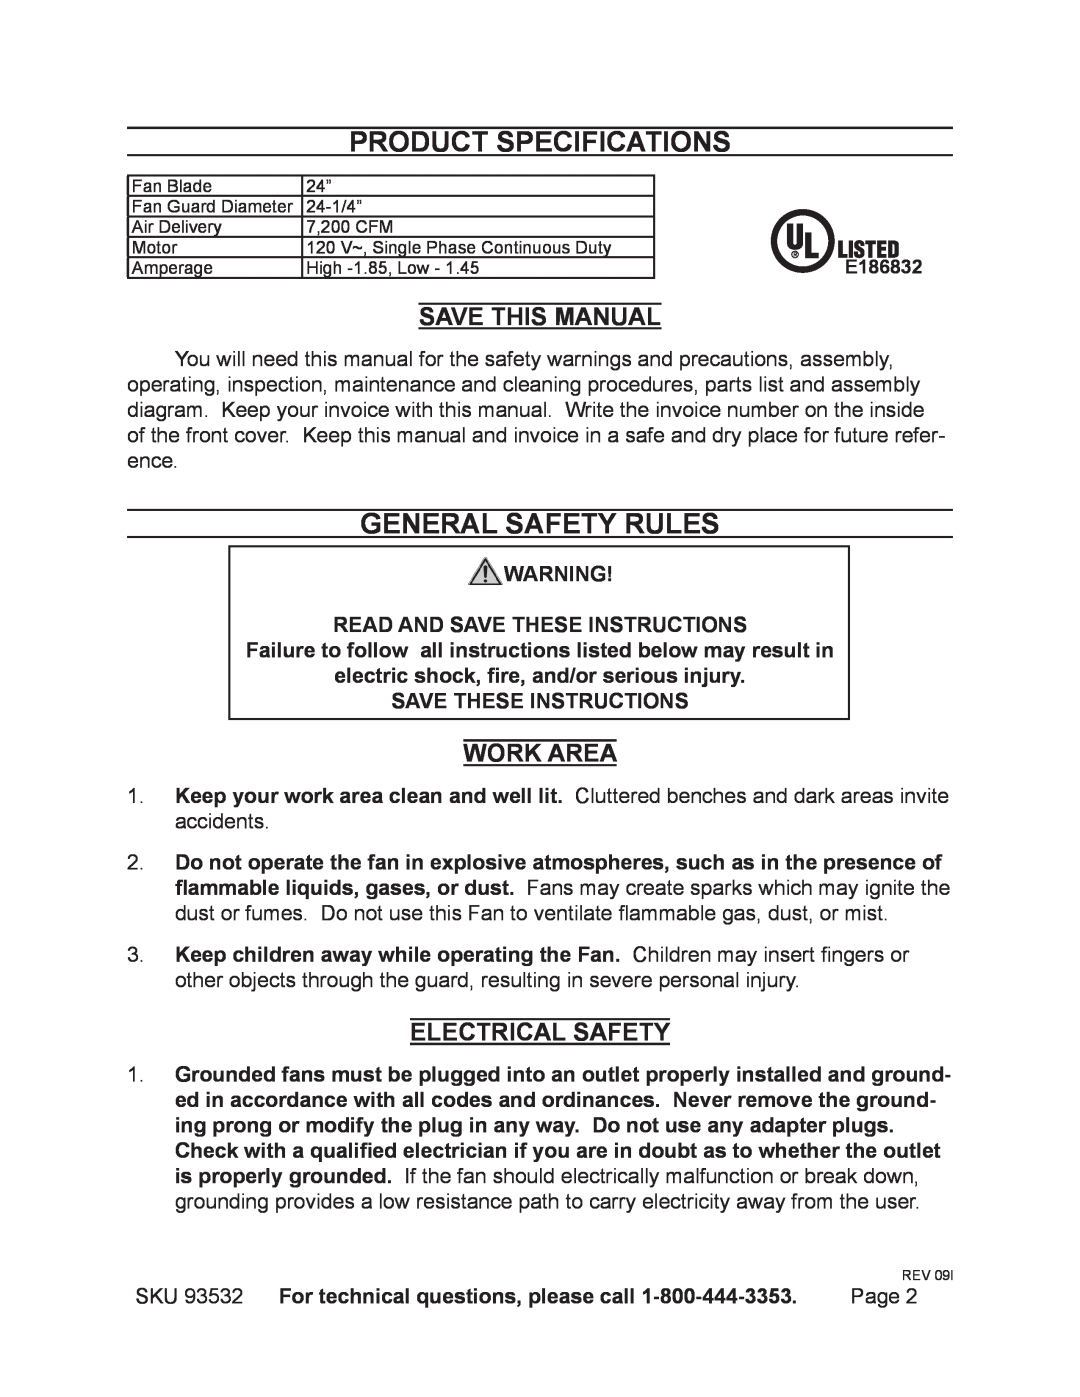 Harbor Freight Tools 93532 Product Specifications, General Safety Rules, Save This Manual, Work Area, Electrical Safety 